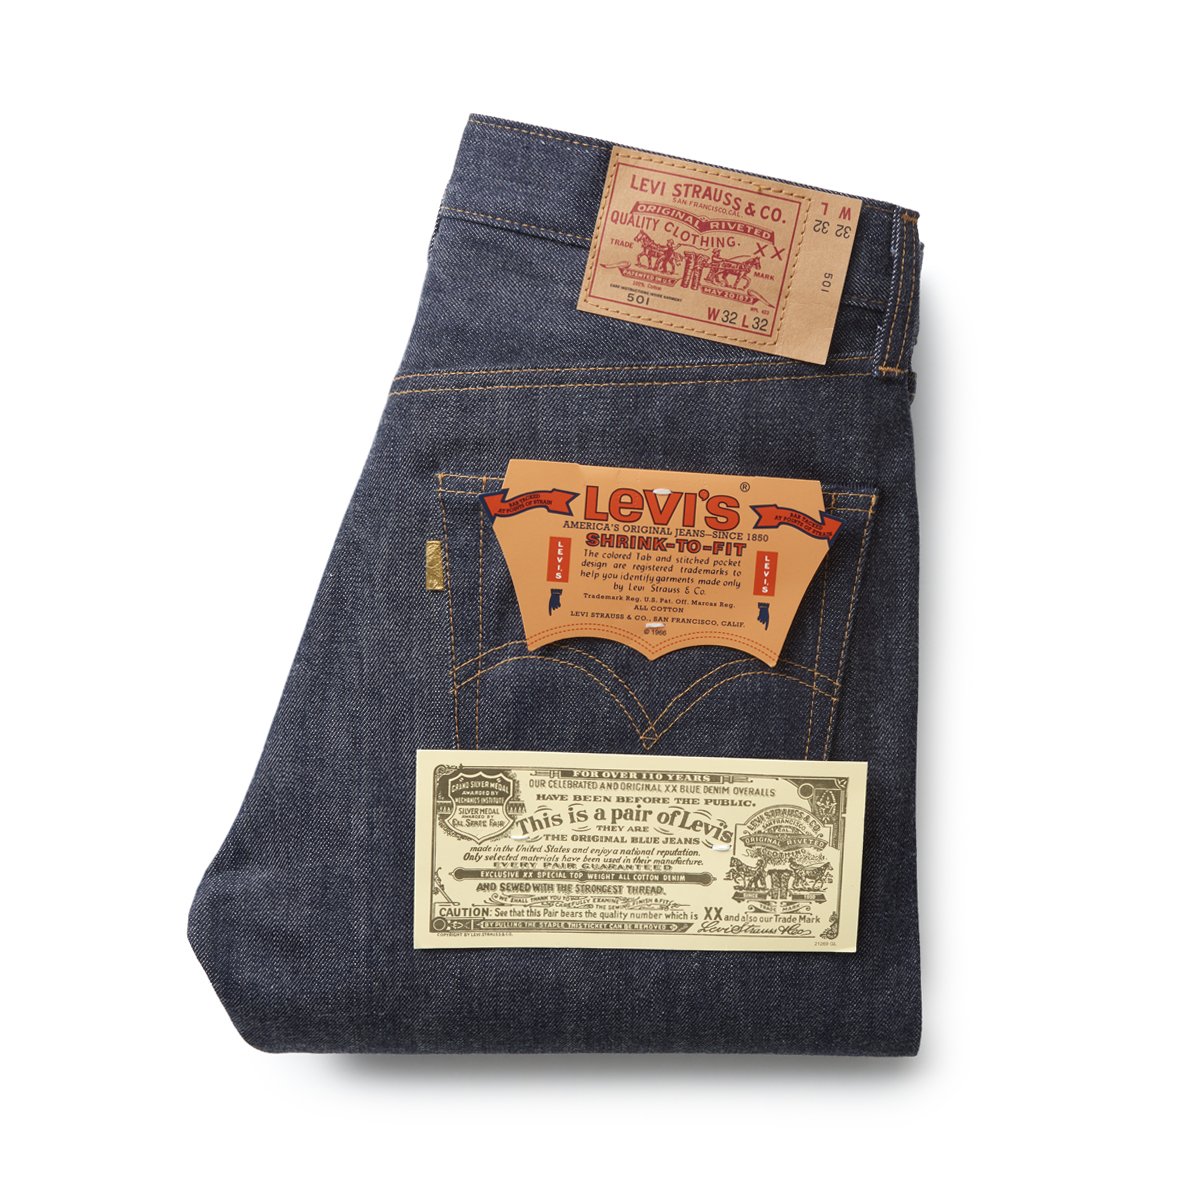 LEVI’S RELEASES NEW GOLDEN TICKET JEANS